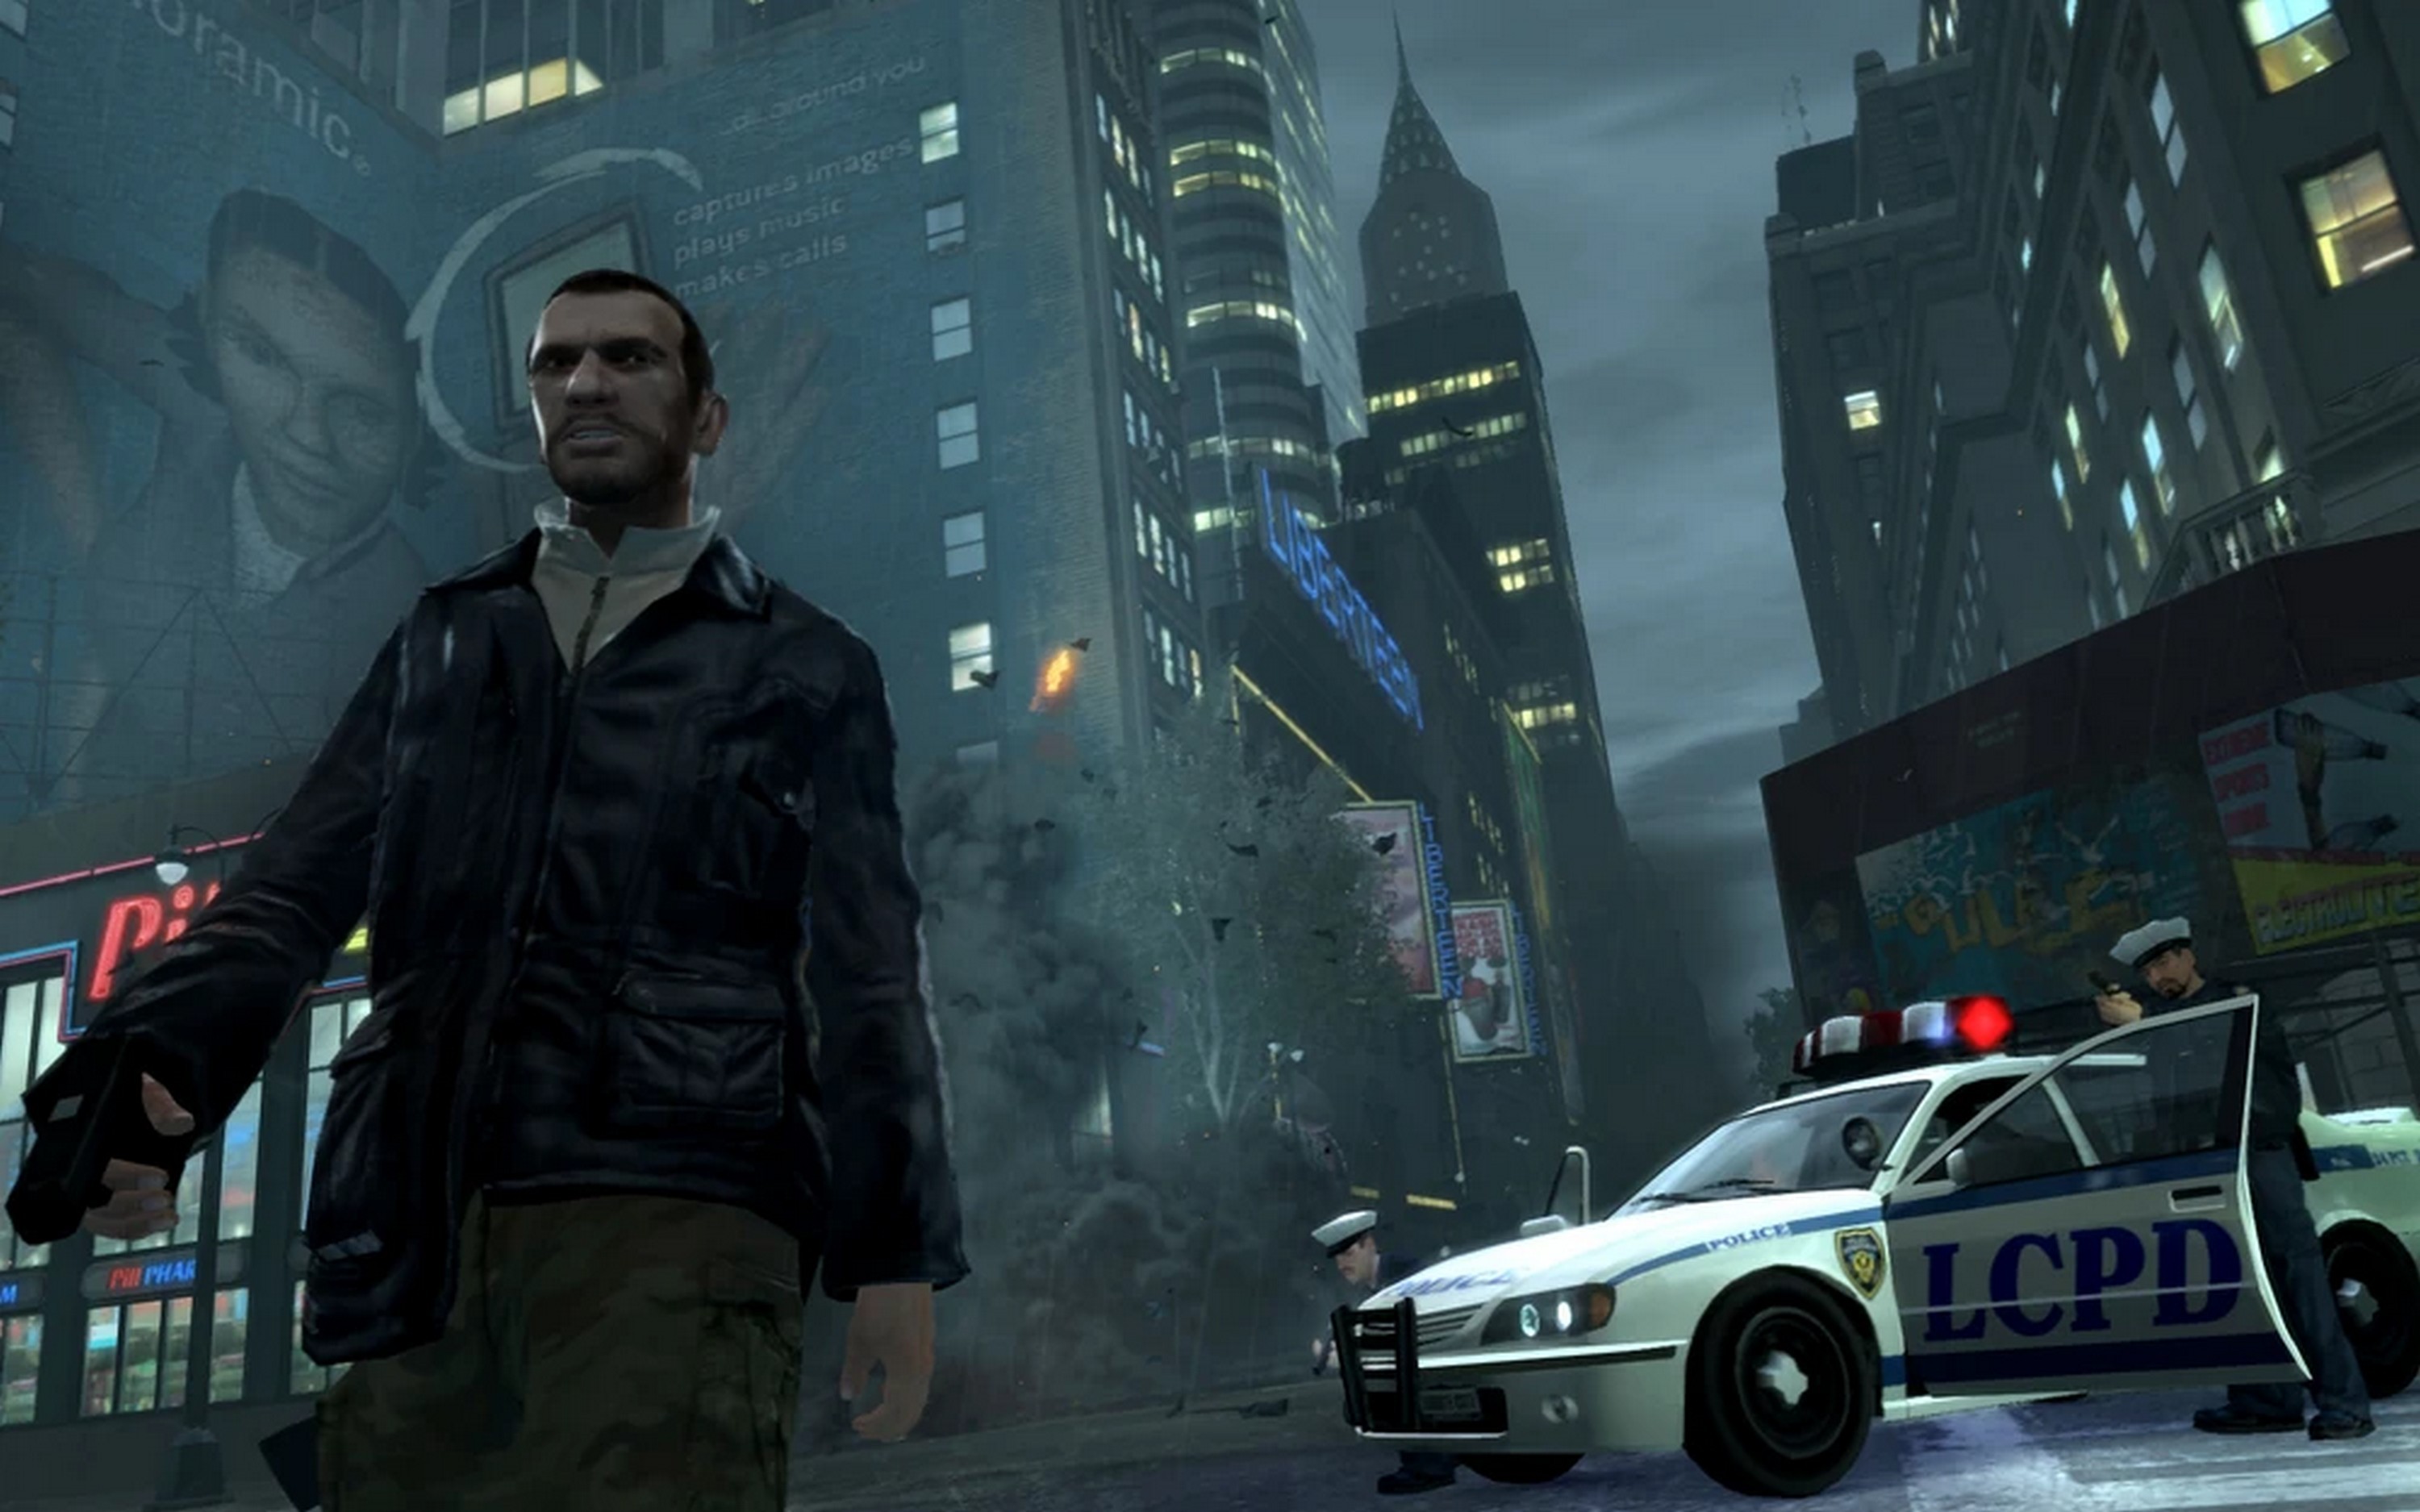 If there was ever a need to cast someone for Niko Bellic, here's